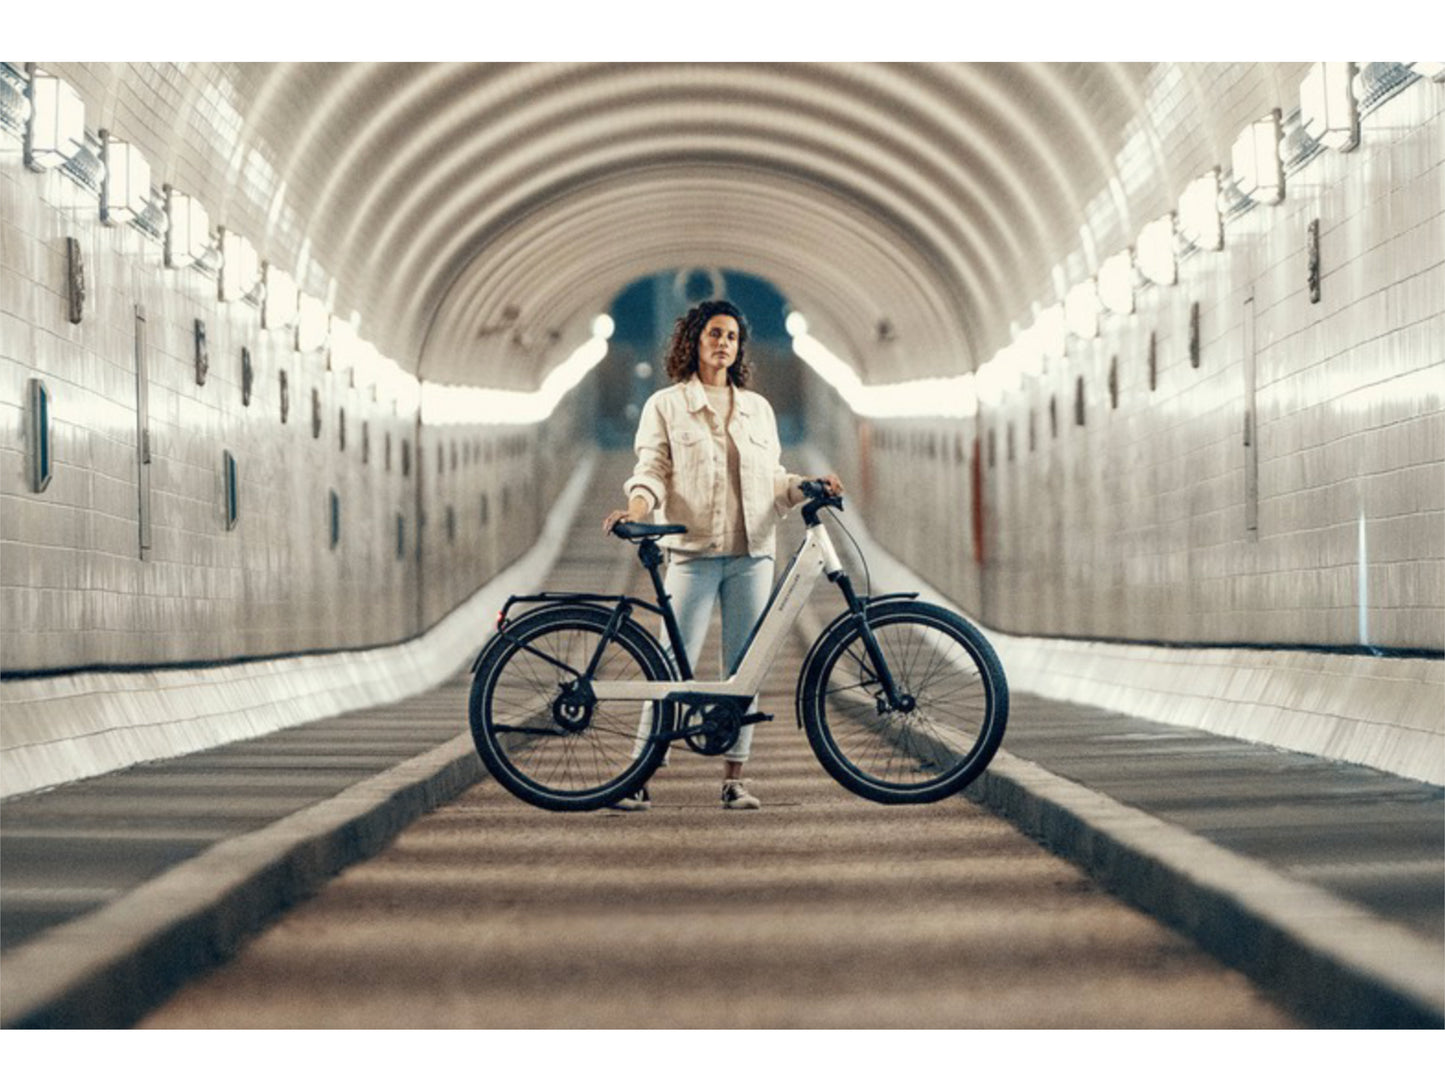 Riese and Muller Nevo GT Touring emtb hardtail woman in city tunnel bike path